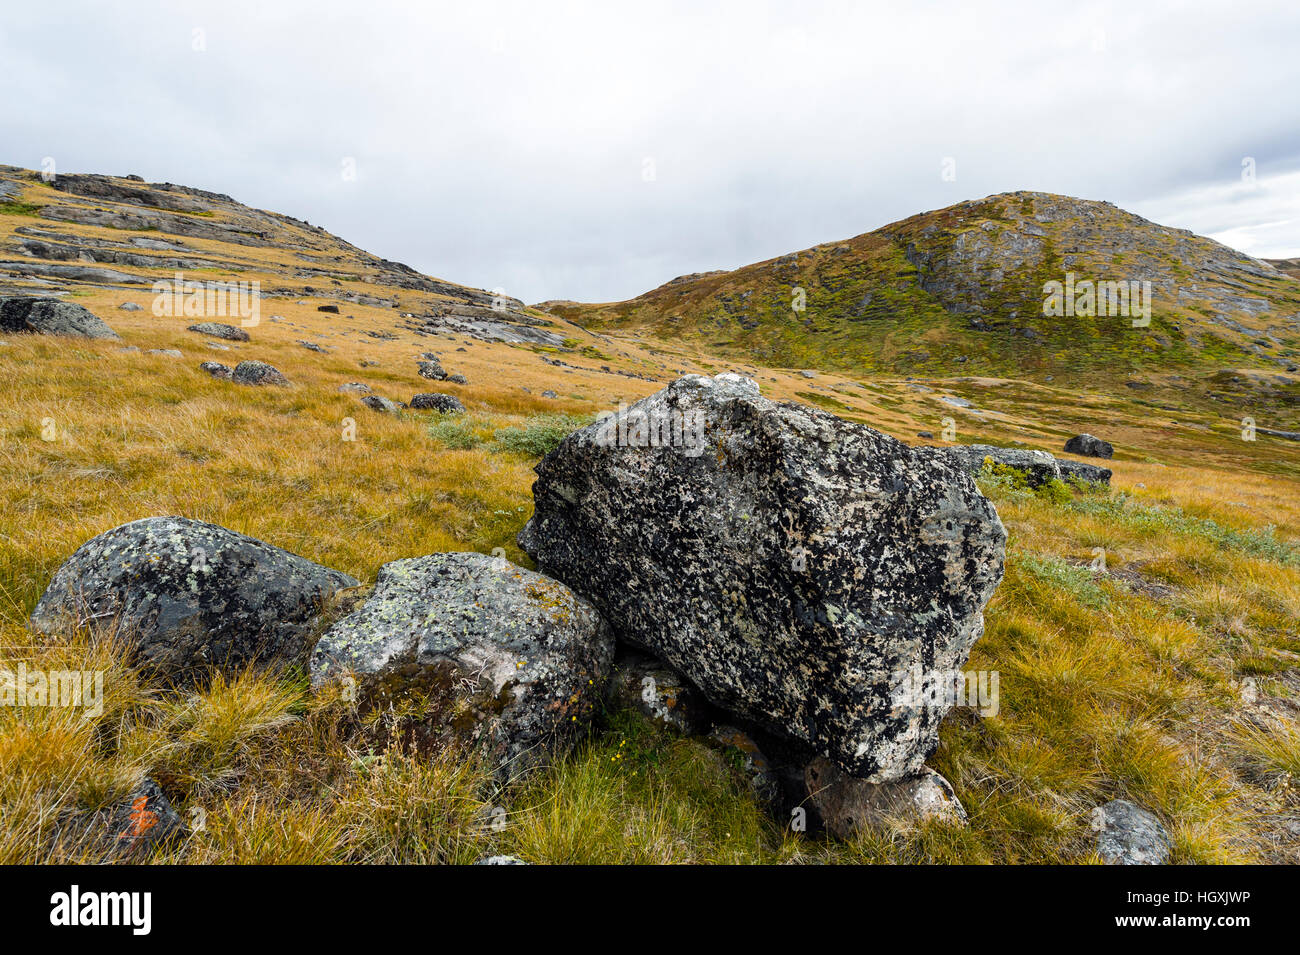 Lichen covered boulders on a windswept tundra. Stock Photo